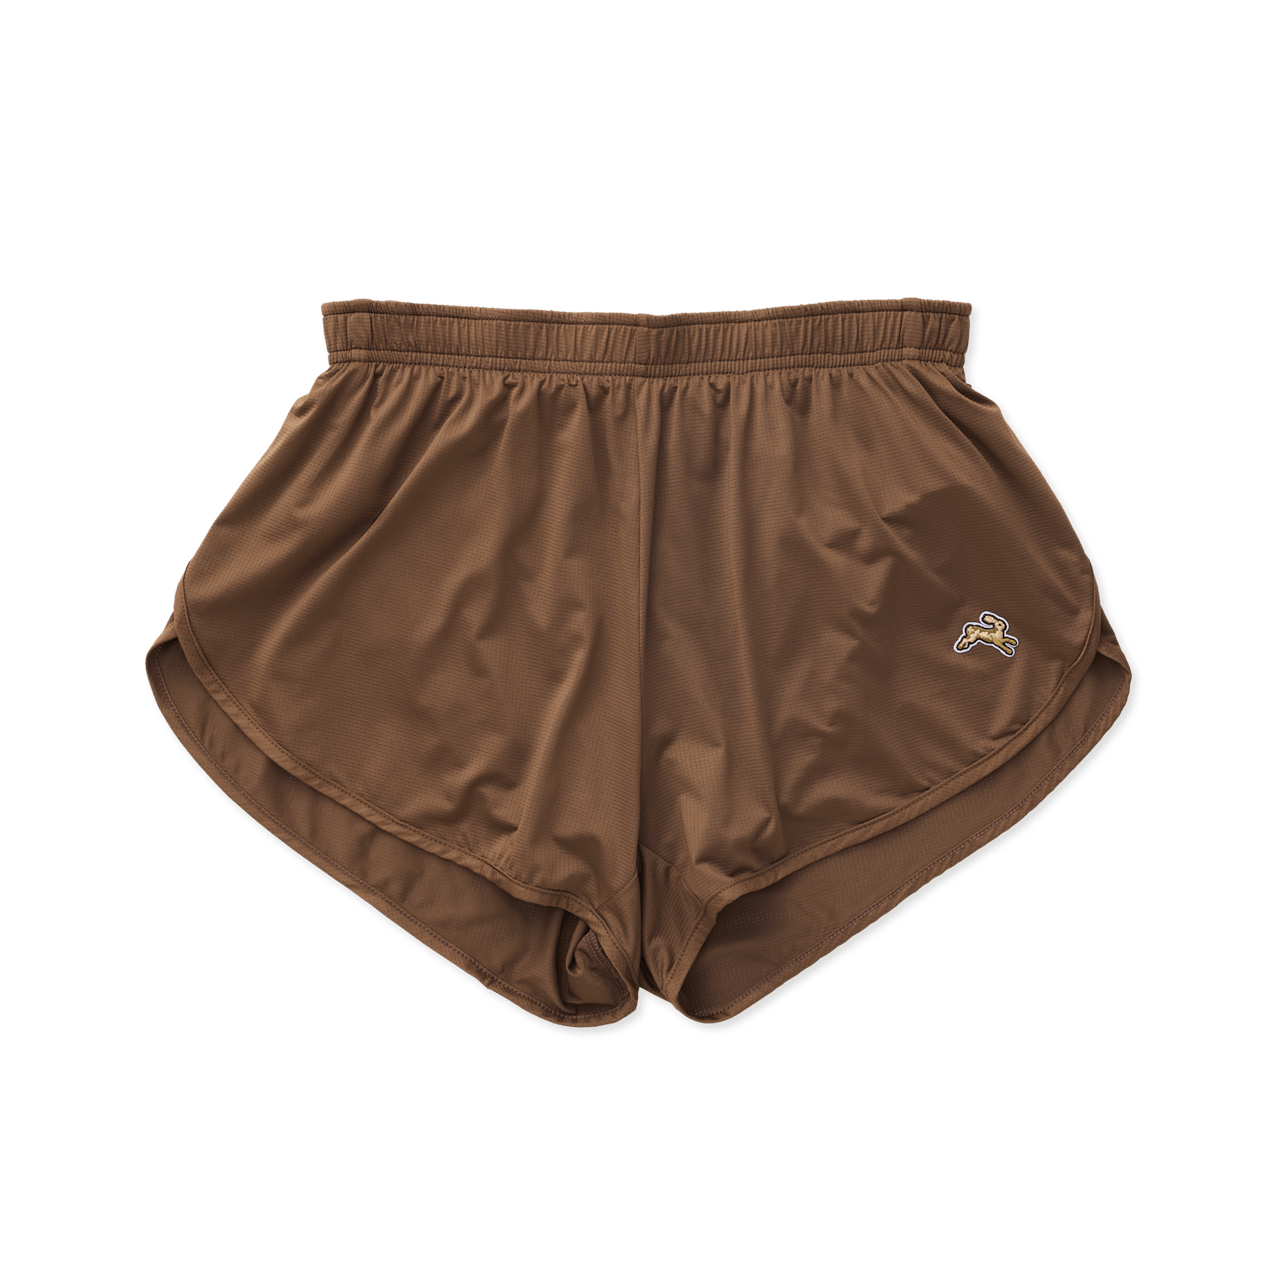 Shorts without liner : r/Ultralight